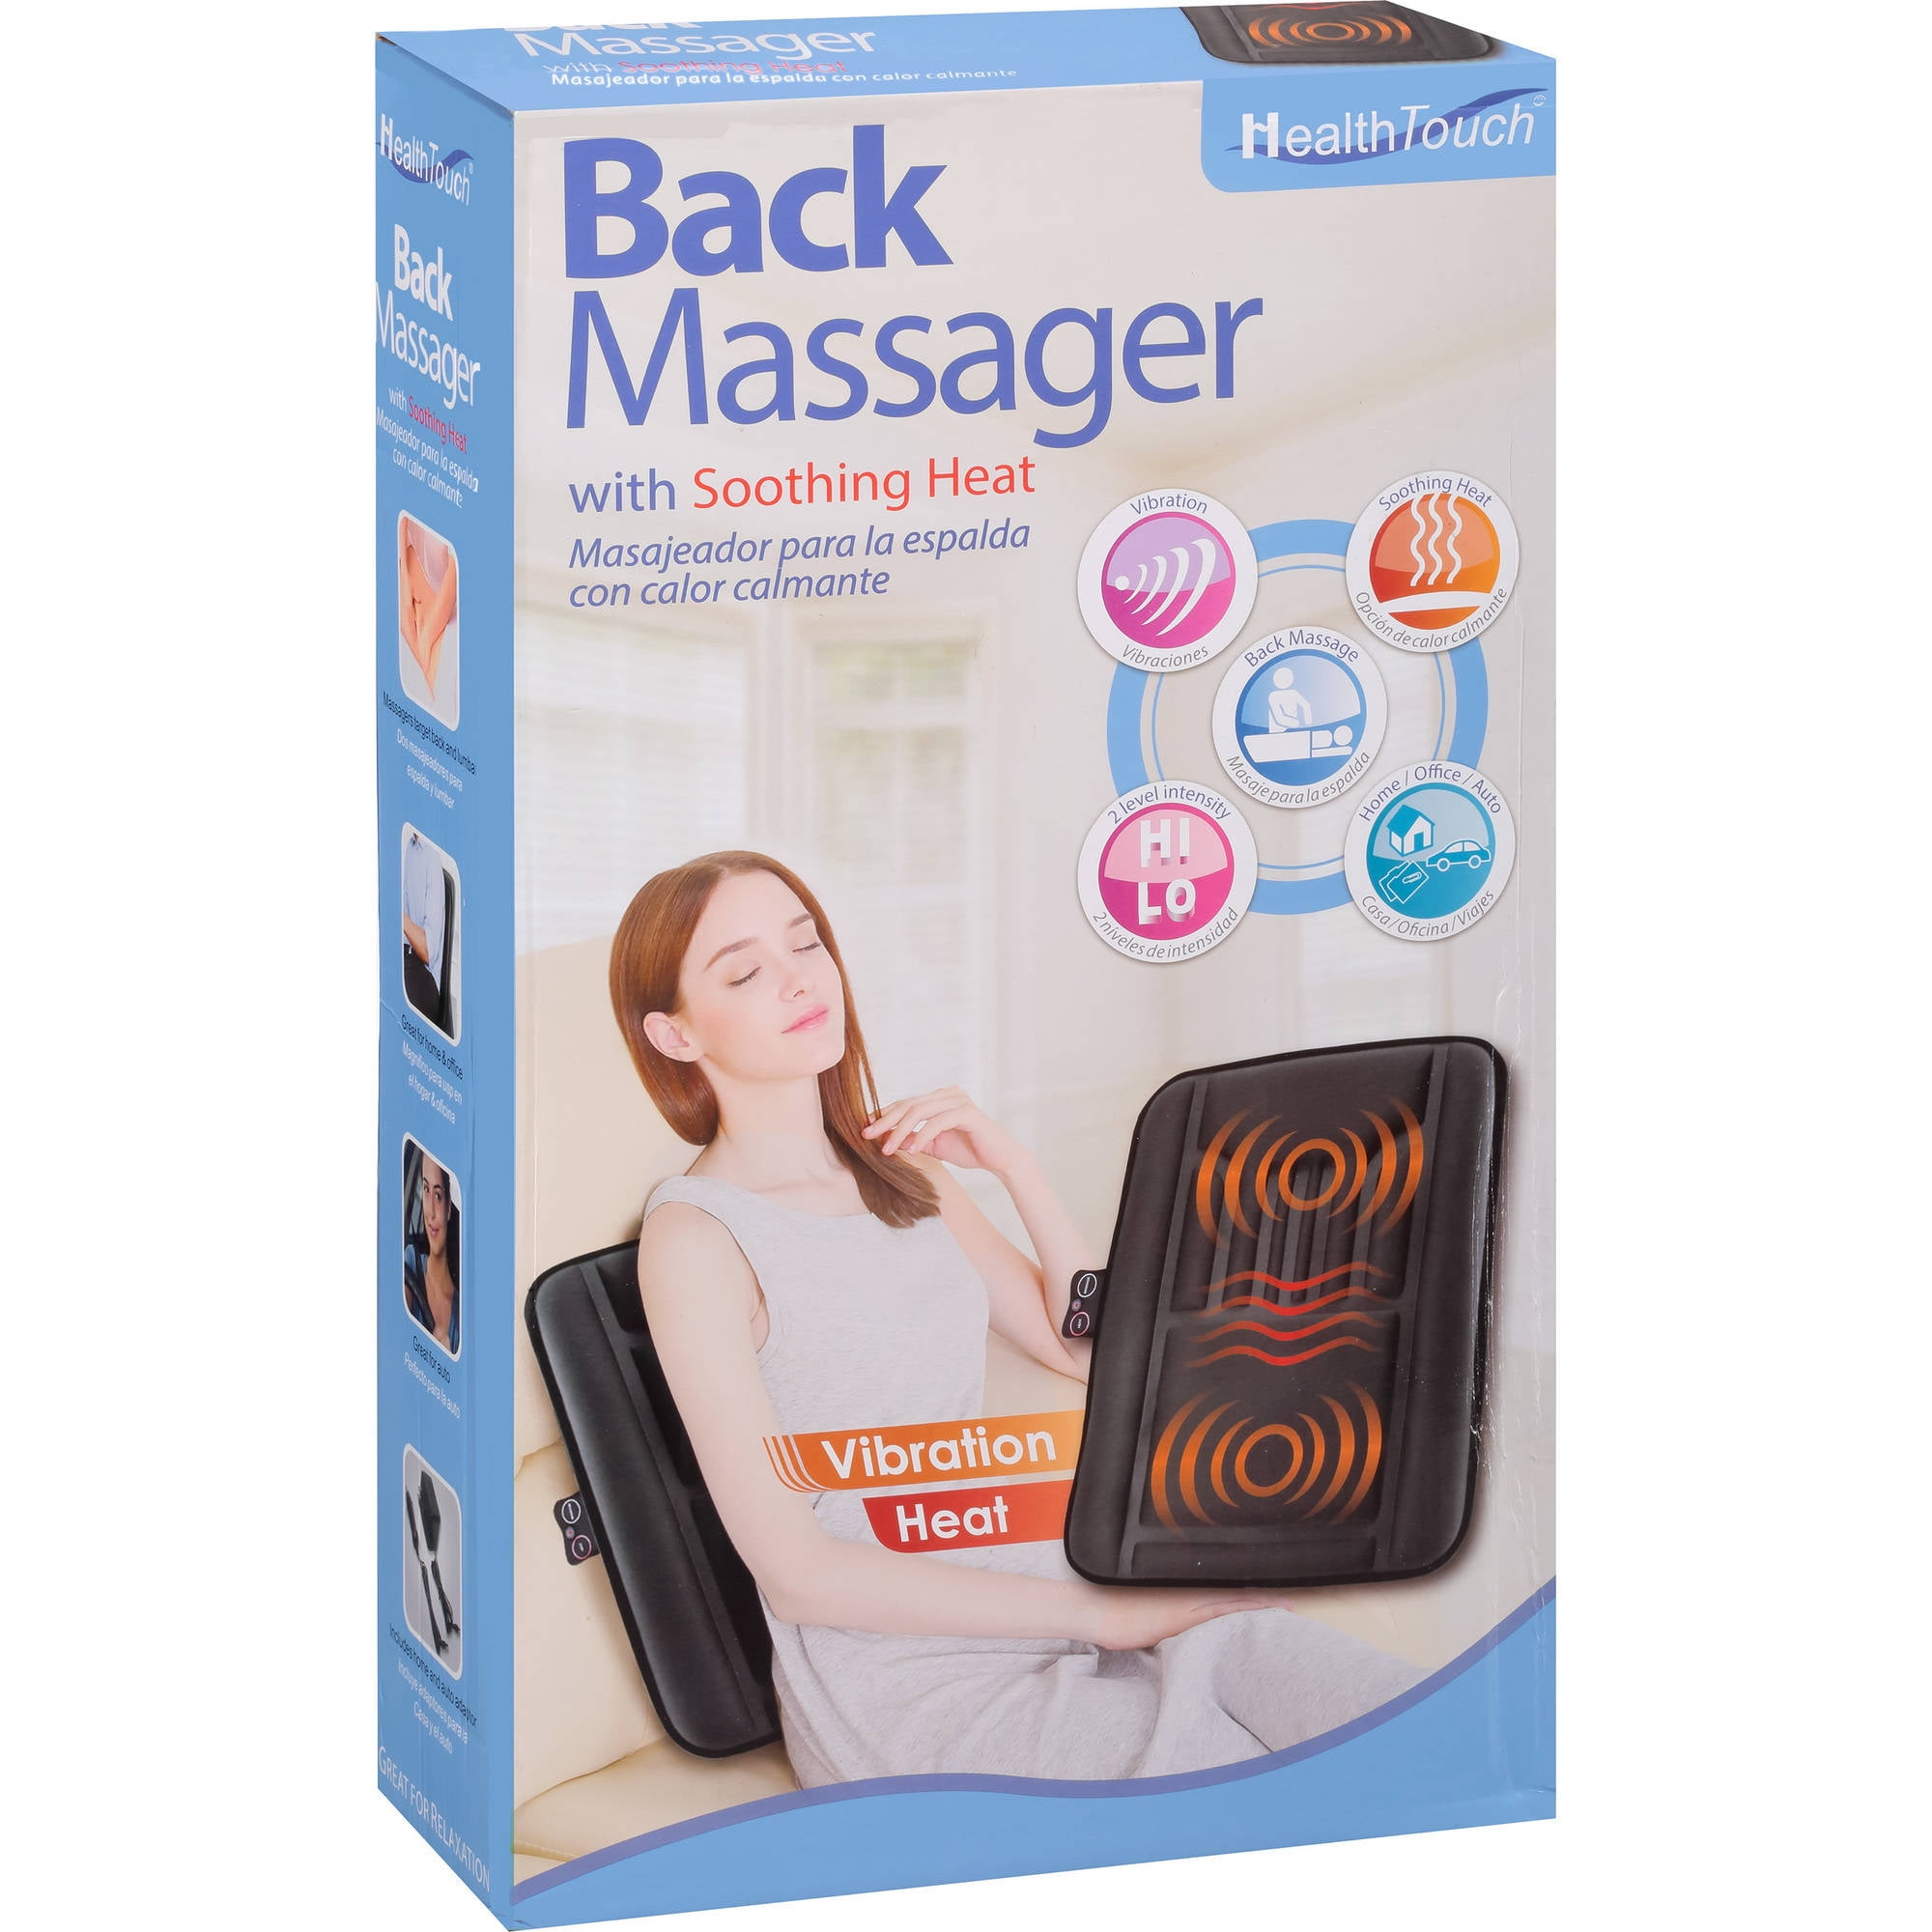 Health Touch Back Massager, Vibration Massage, Soothing Heat, Back  Relaxation 